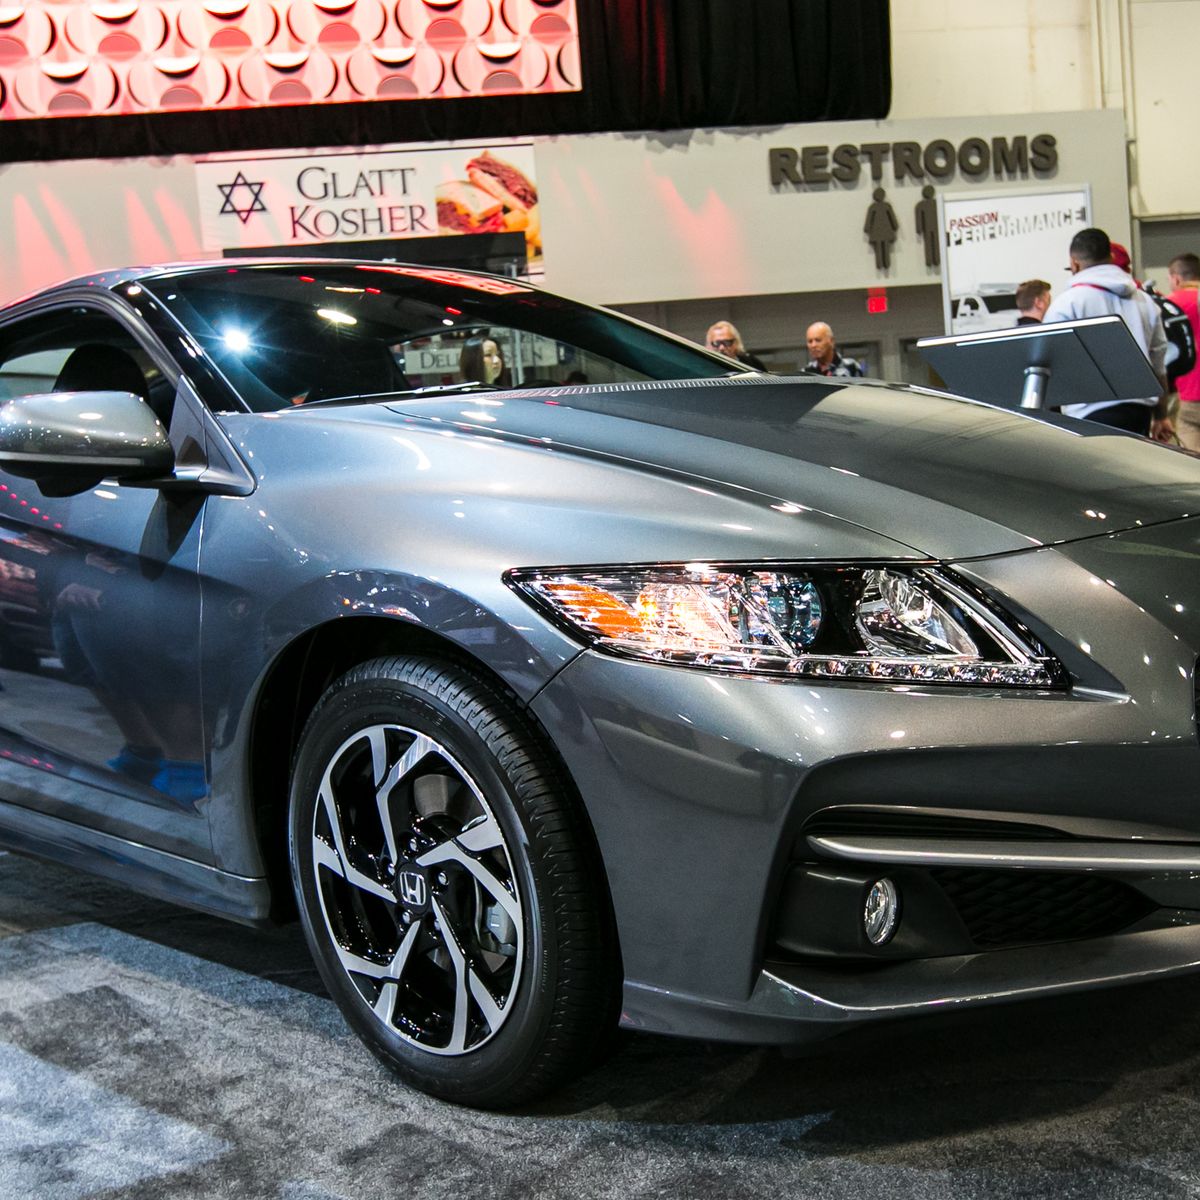 Someone Bought A New Honda CR-Z In 2020, Four Years After It Was Killed